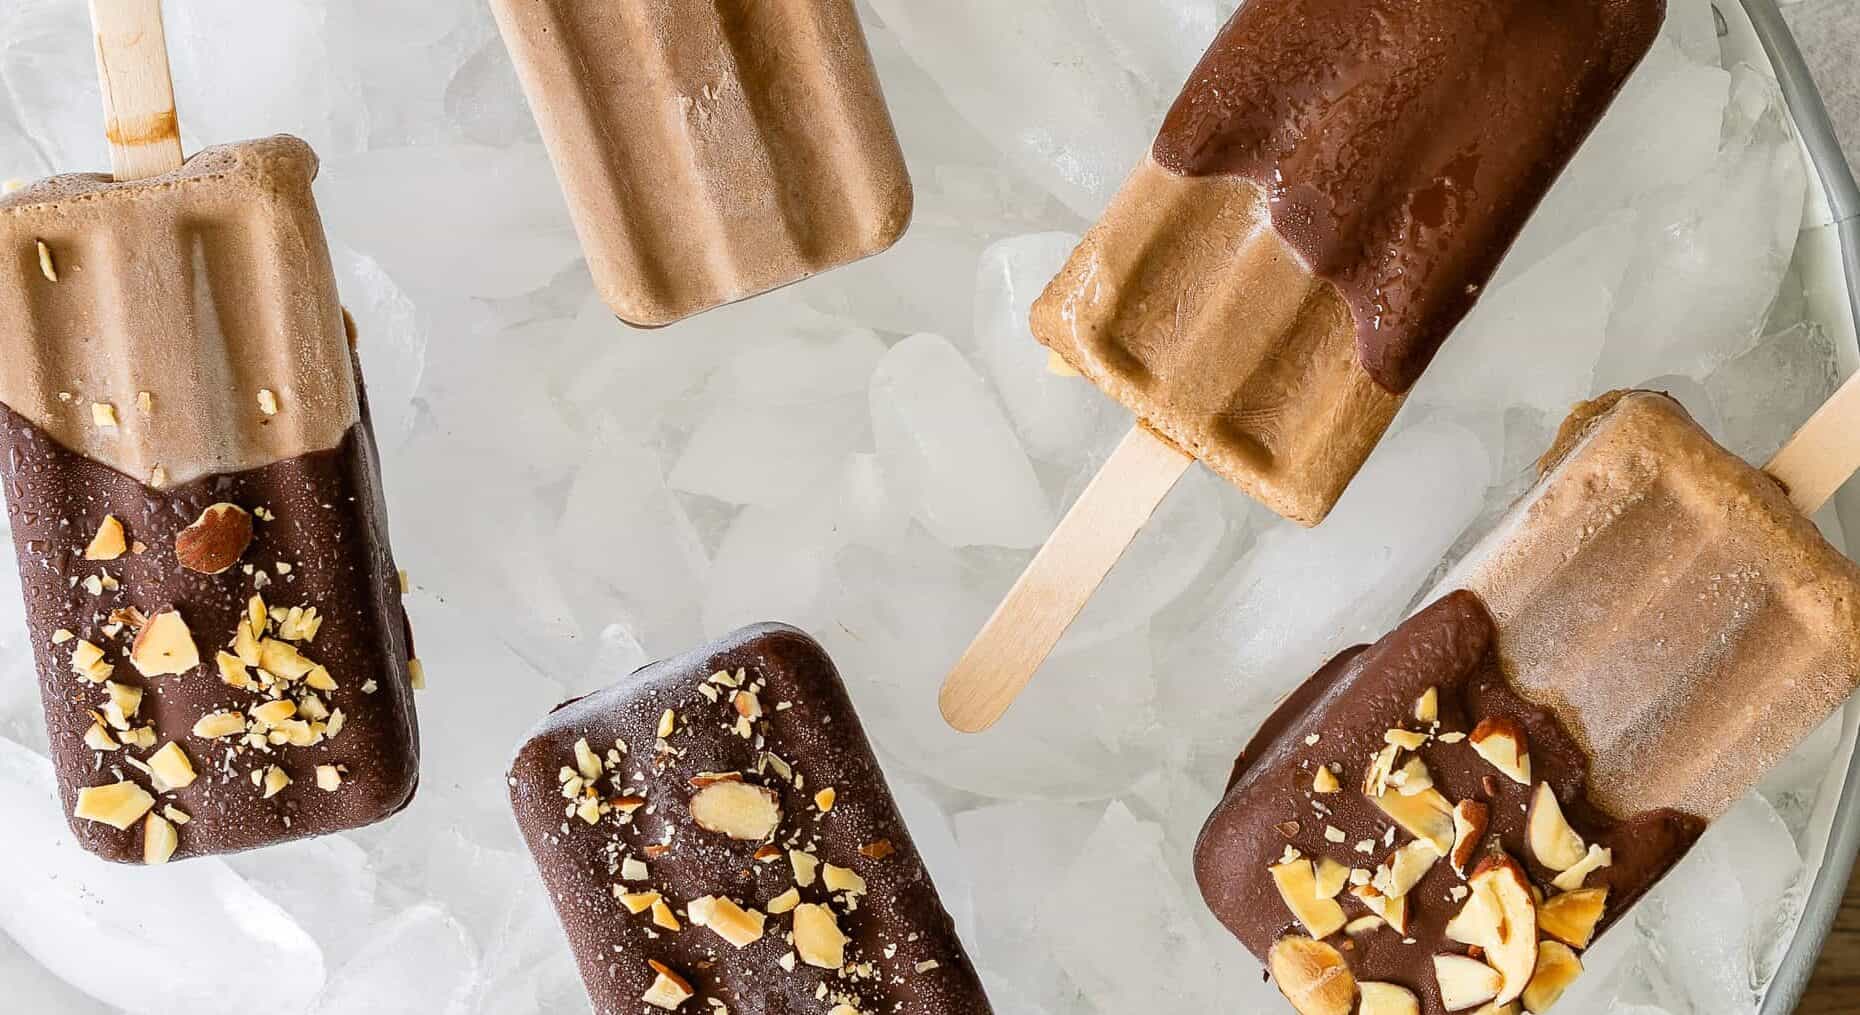 Creamy Prune Caramel Mocha Pops covered in chocolate and coated in nuts on a tray of ice